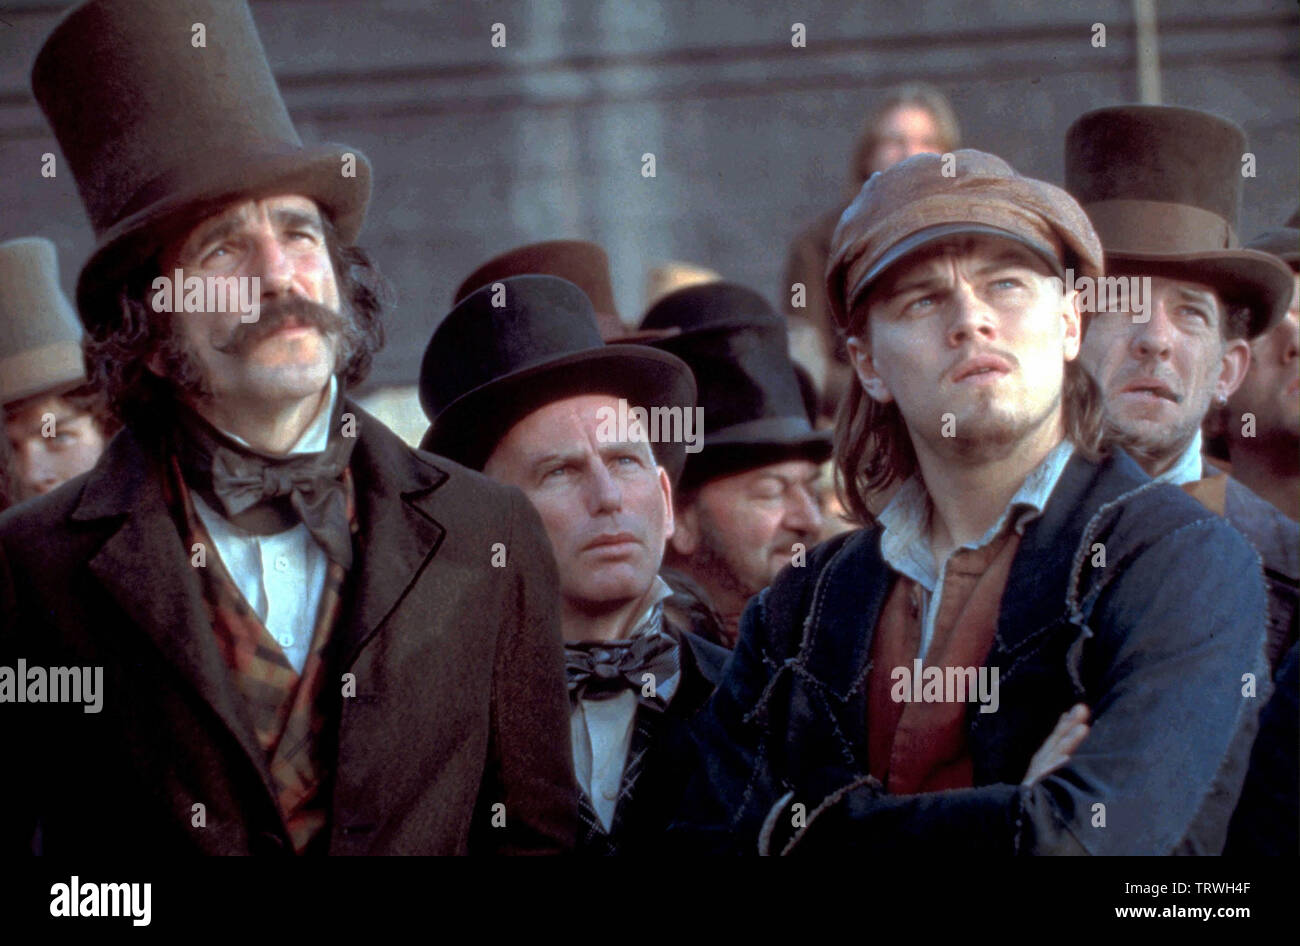 DANIEL DAY-LEWIS and LEONARDO DICAPRIO in GANGS OF NEW YORK (2002). Copyright: Editorial use only. No merchandising or book covers. This is a publicly distributed handout. Access rights only, no license of copyright provided. Only to be reproduced in conjunction with promotion of this film. Credit: MIRAMAX / Album Stock Photo